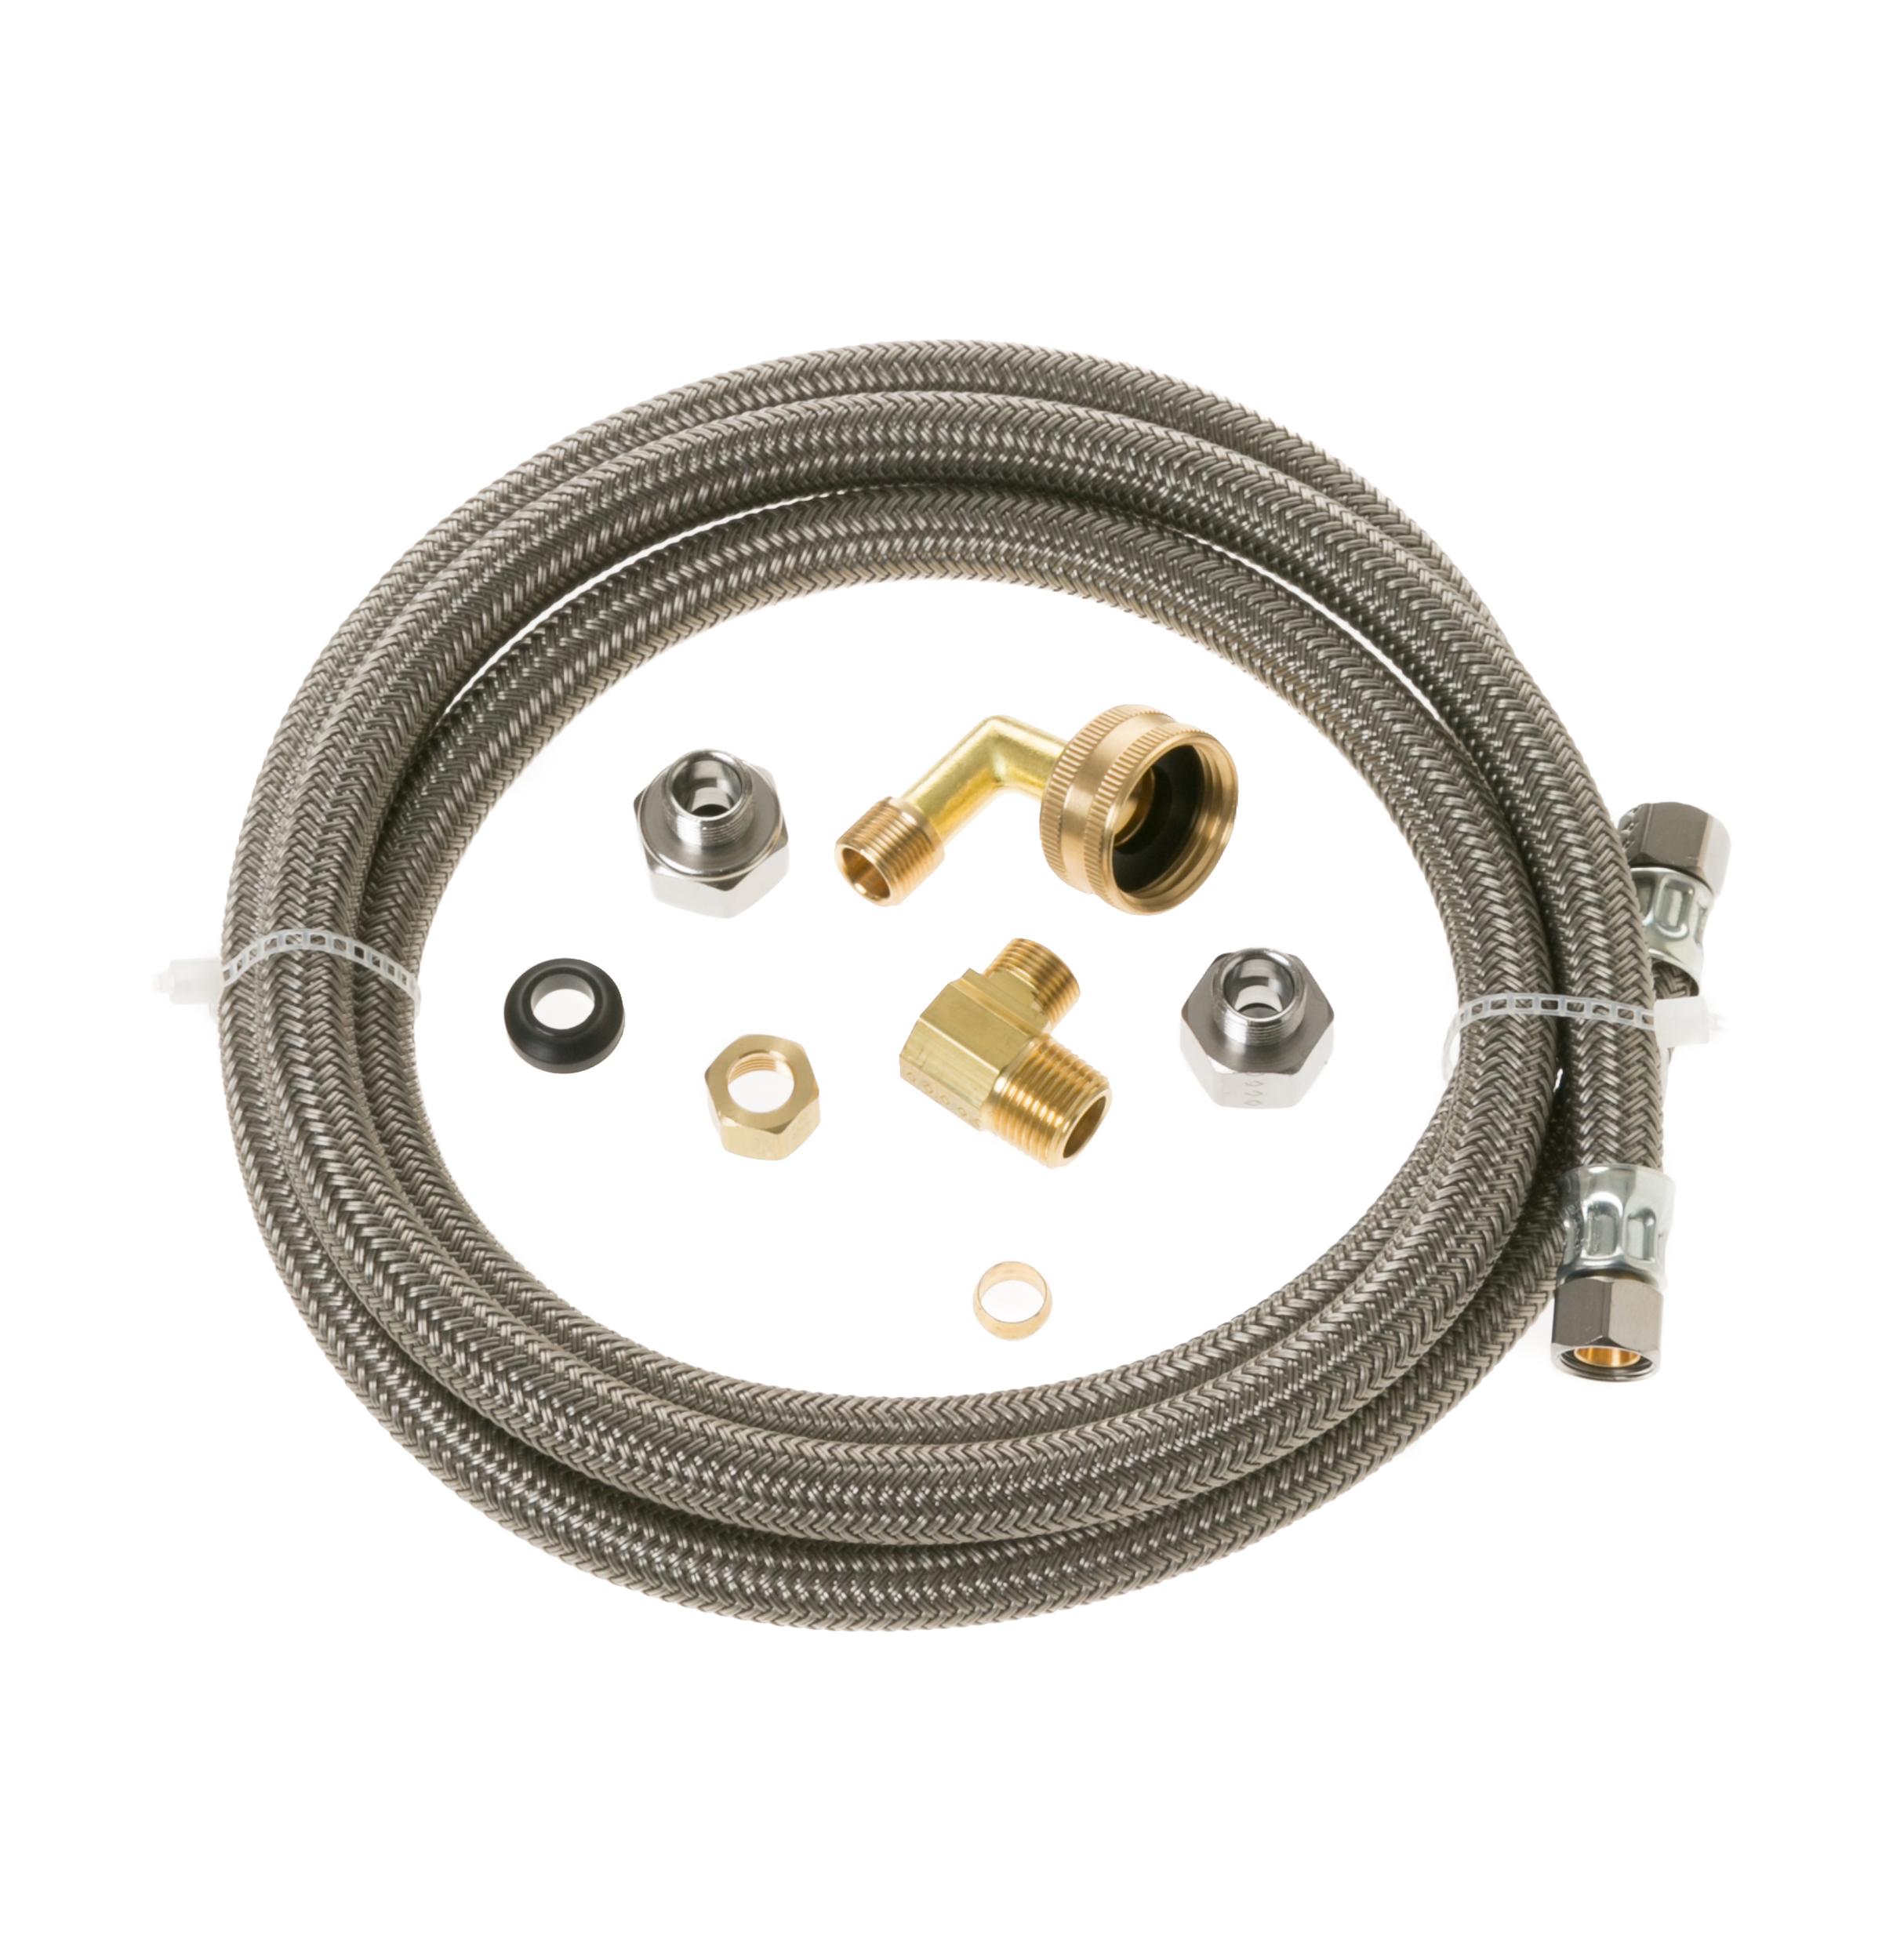 Ge Appliances 6' Universal Dishwasher Connector Kit with Adapter